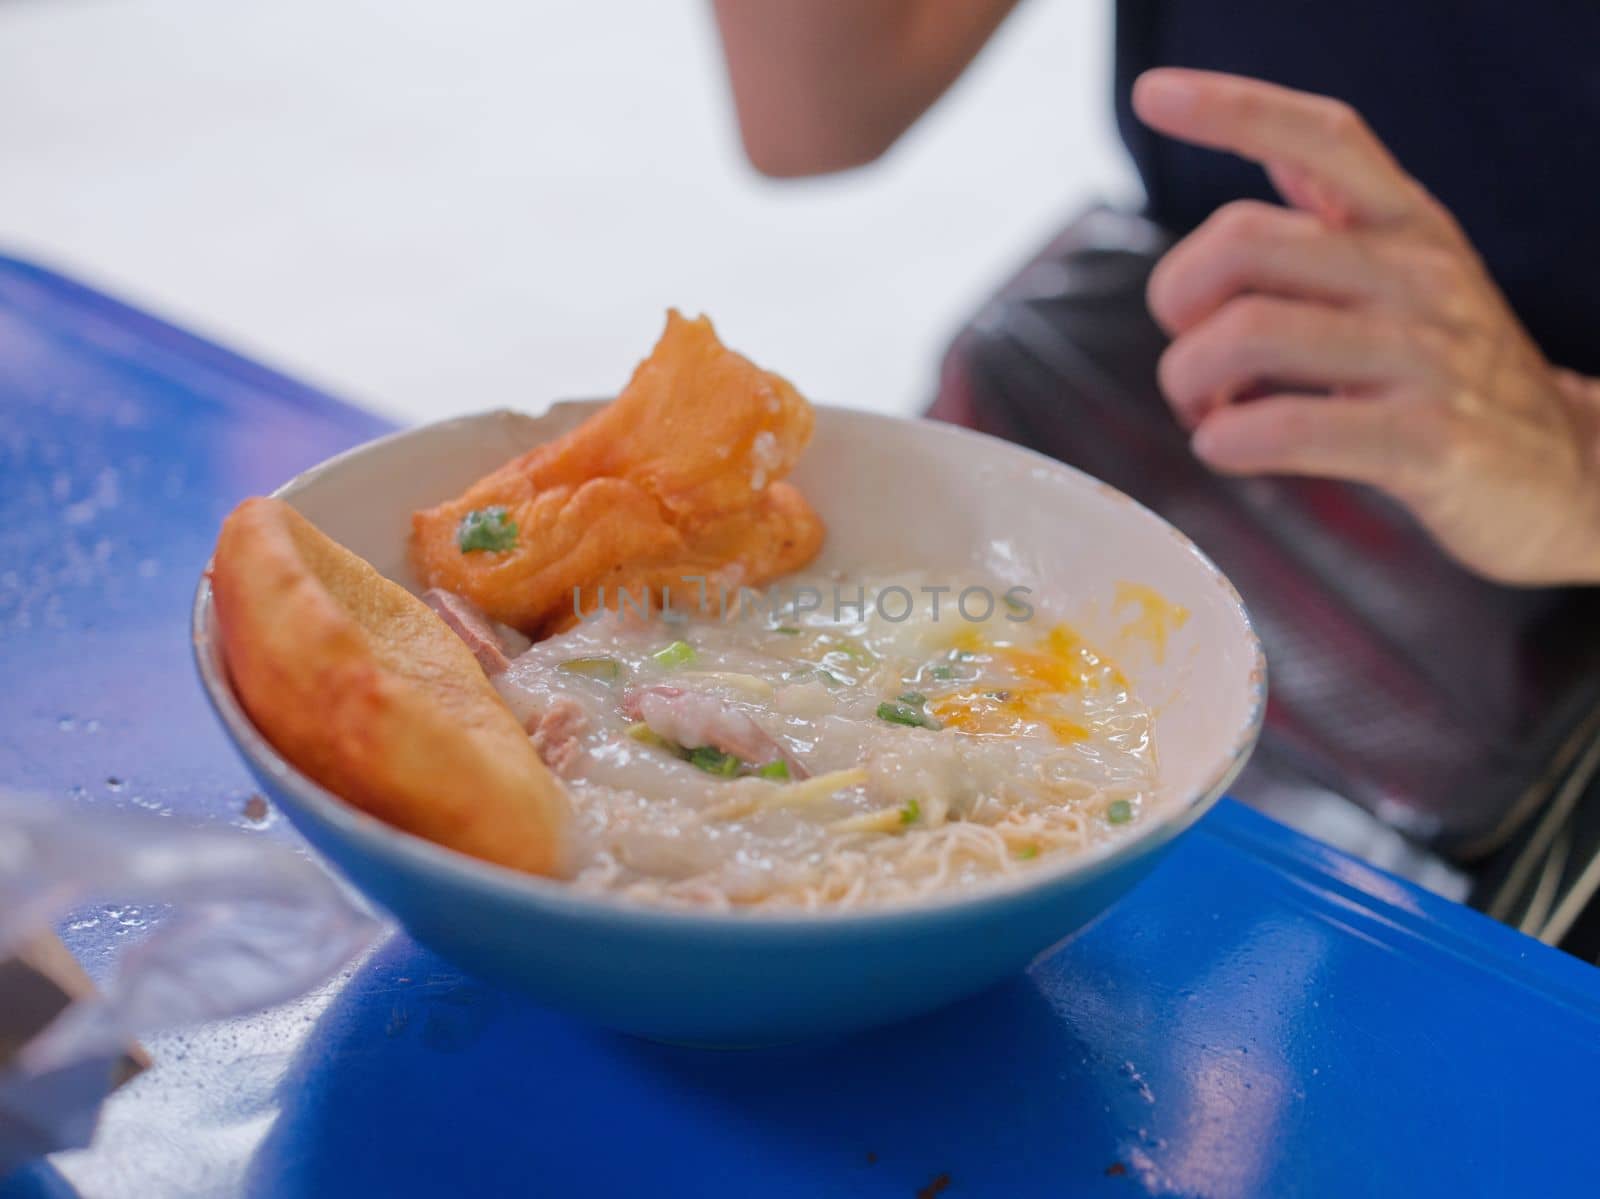 Chinese porridge with egg in a bowel with chinese donughnut . Concept breakfast set by Hepjam